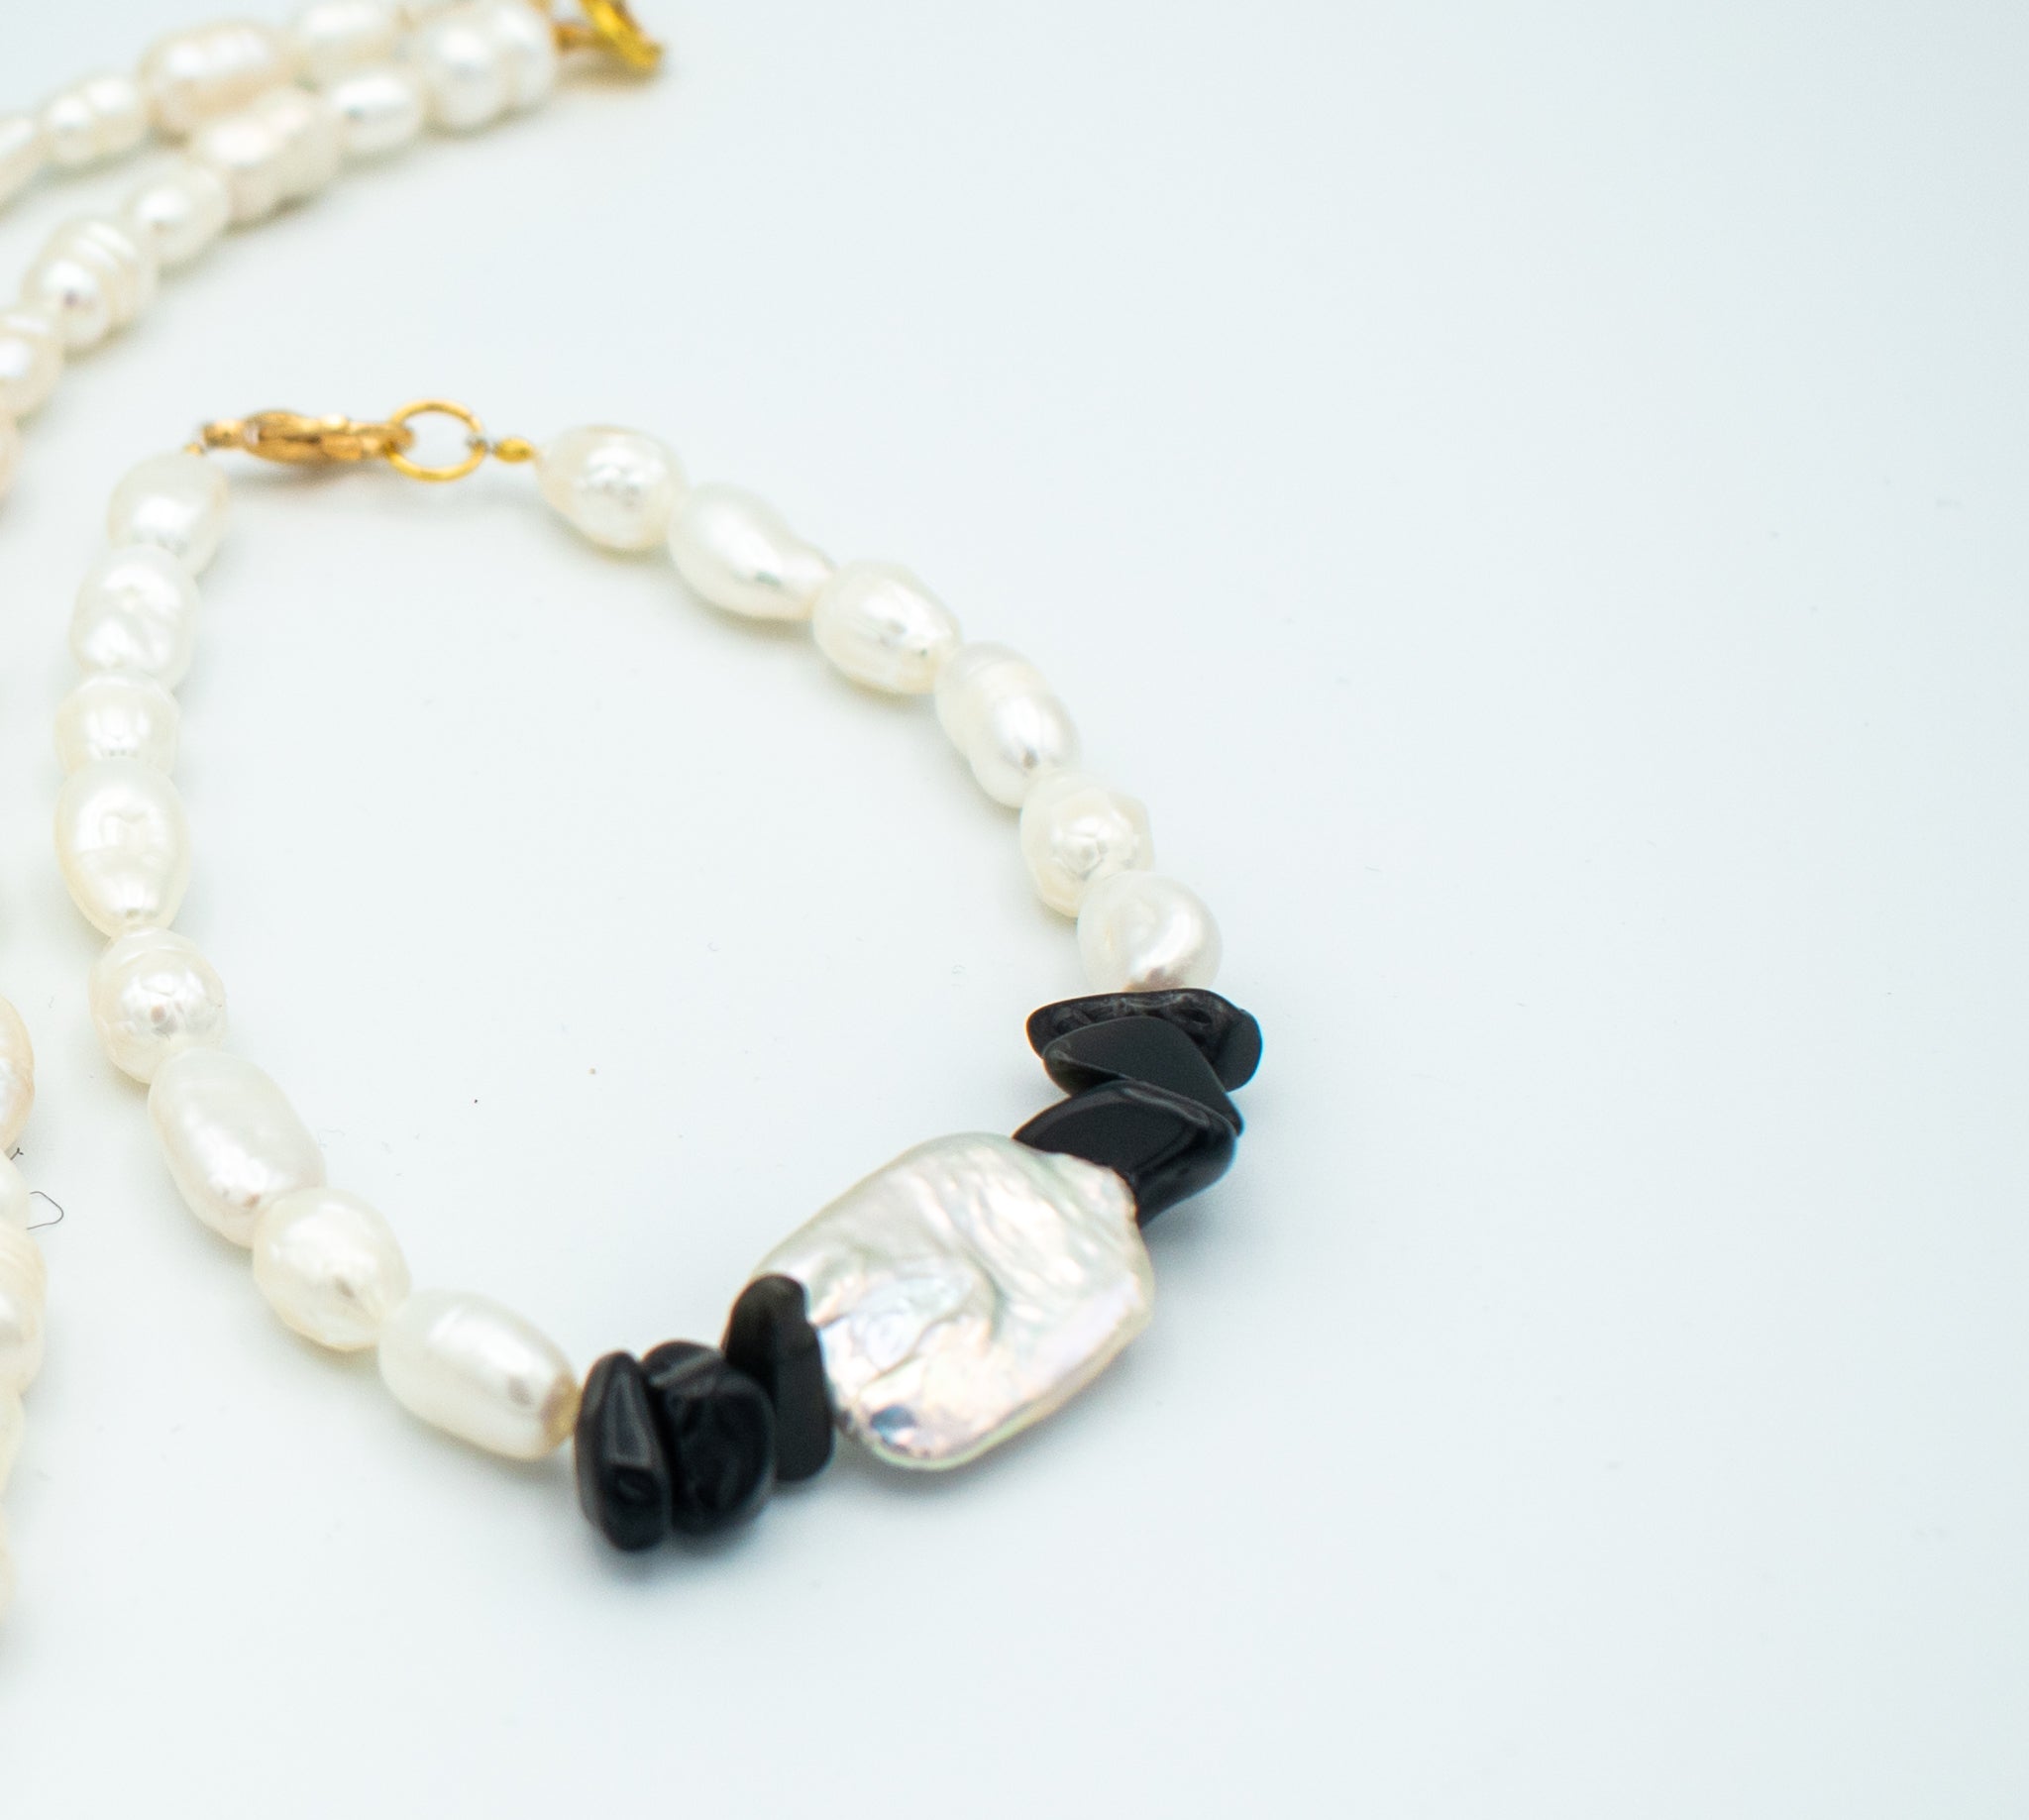 Emanuel Health Black Beads With A Touch Of Blue And White Necklace